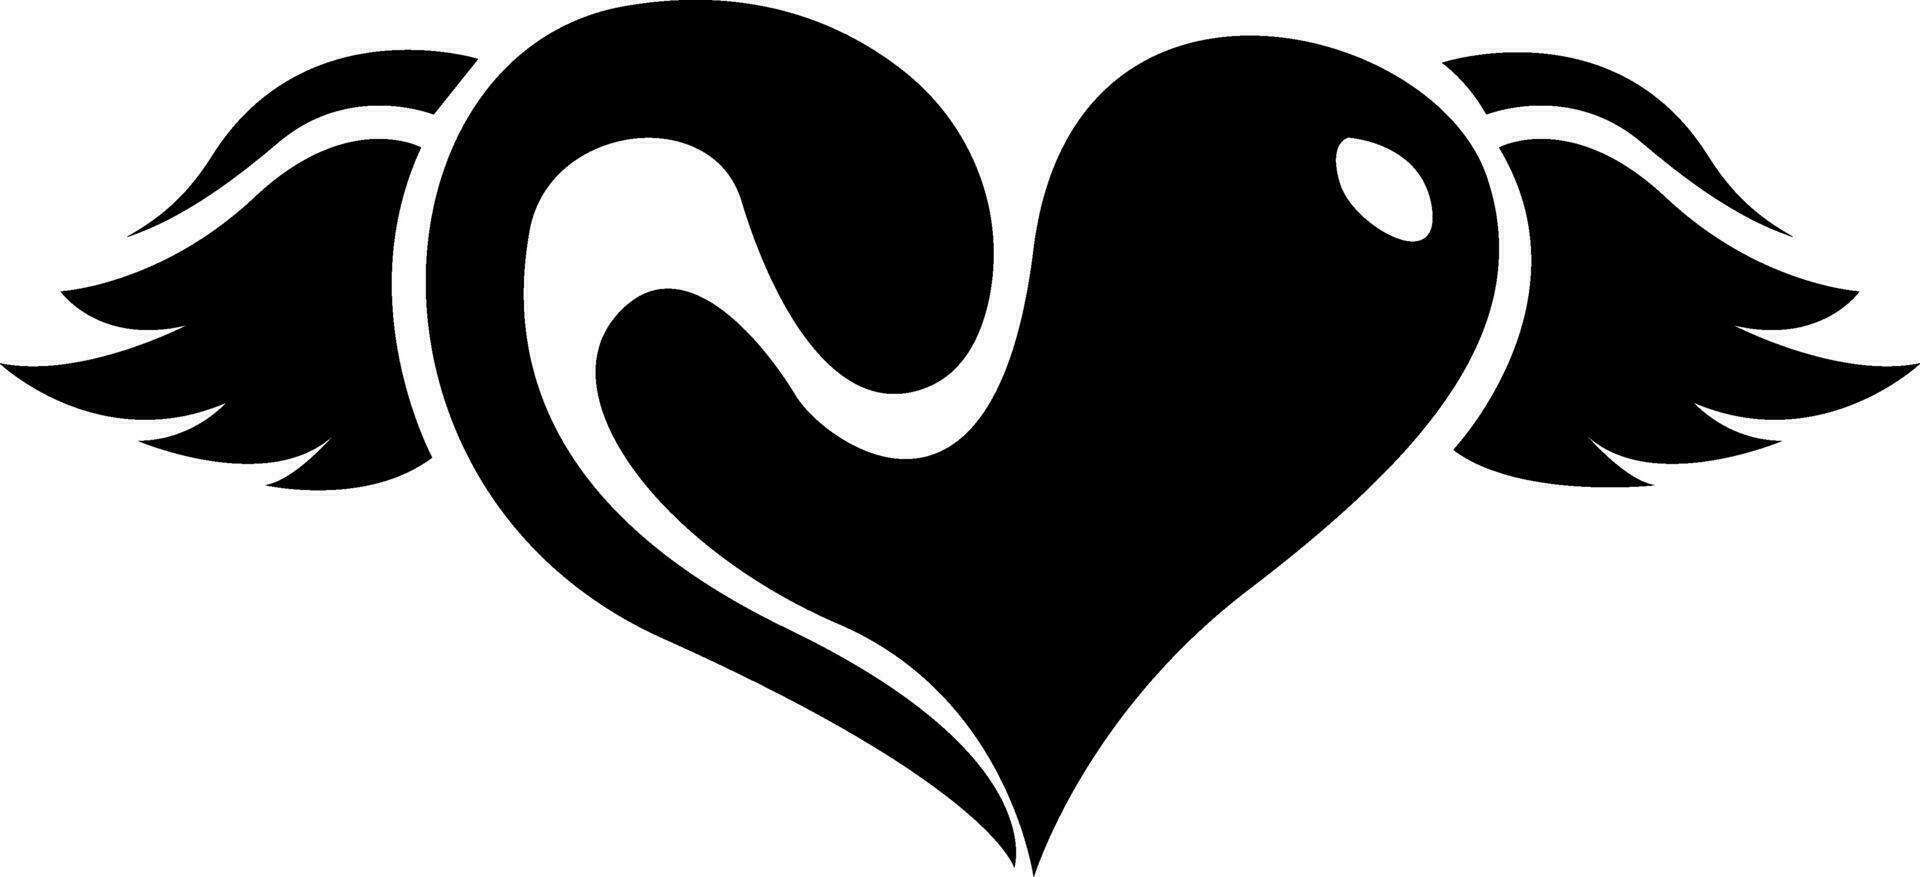 Heart with wings tattoo, tattoo illustration, vector on a white background.